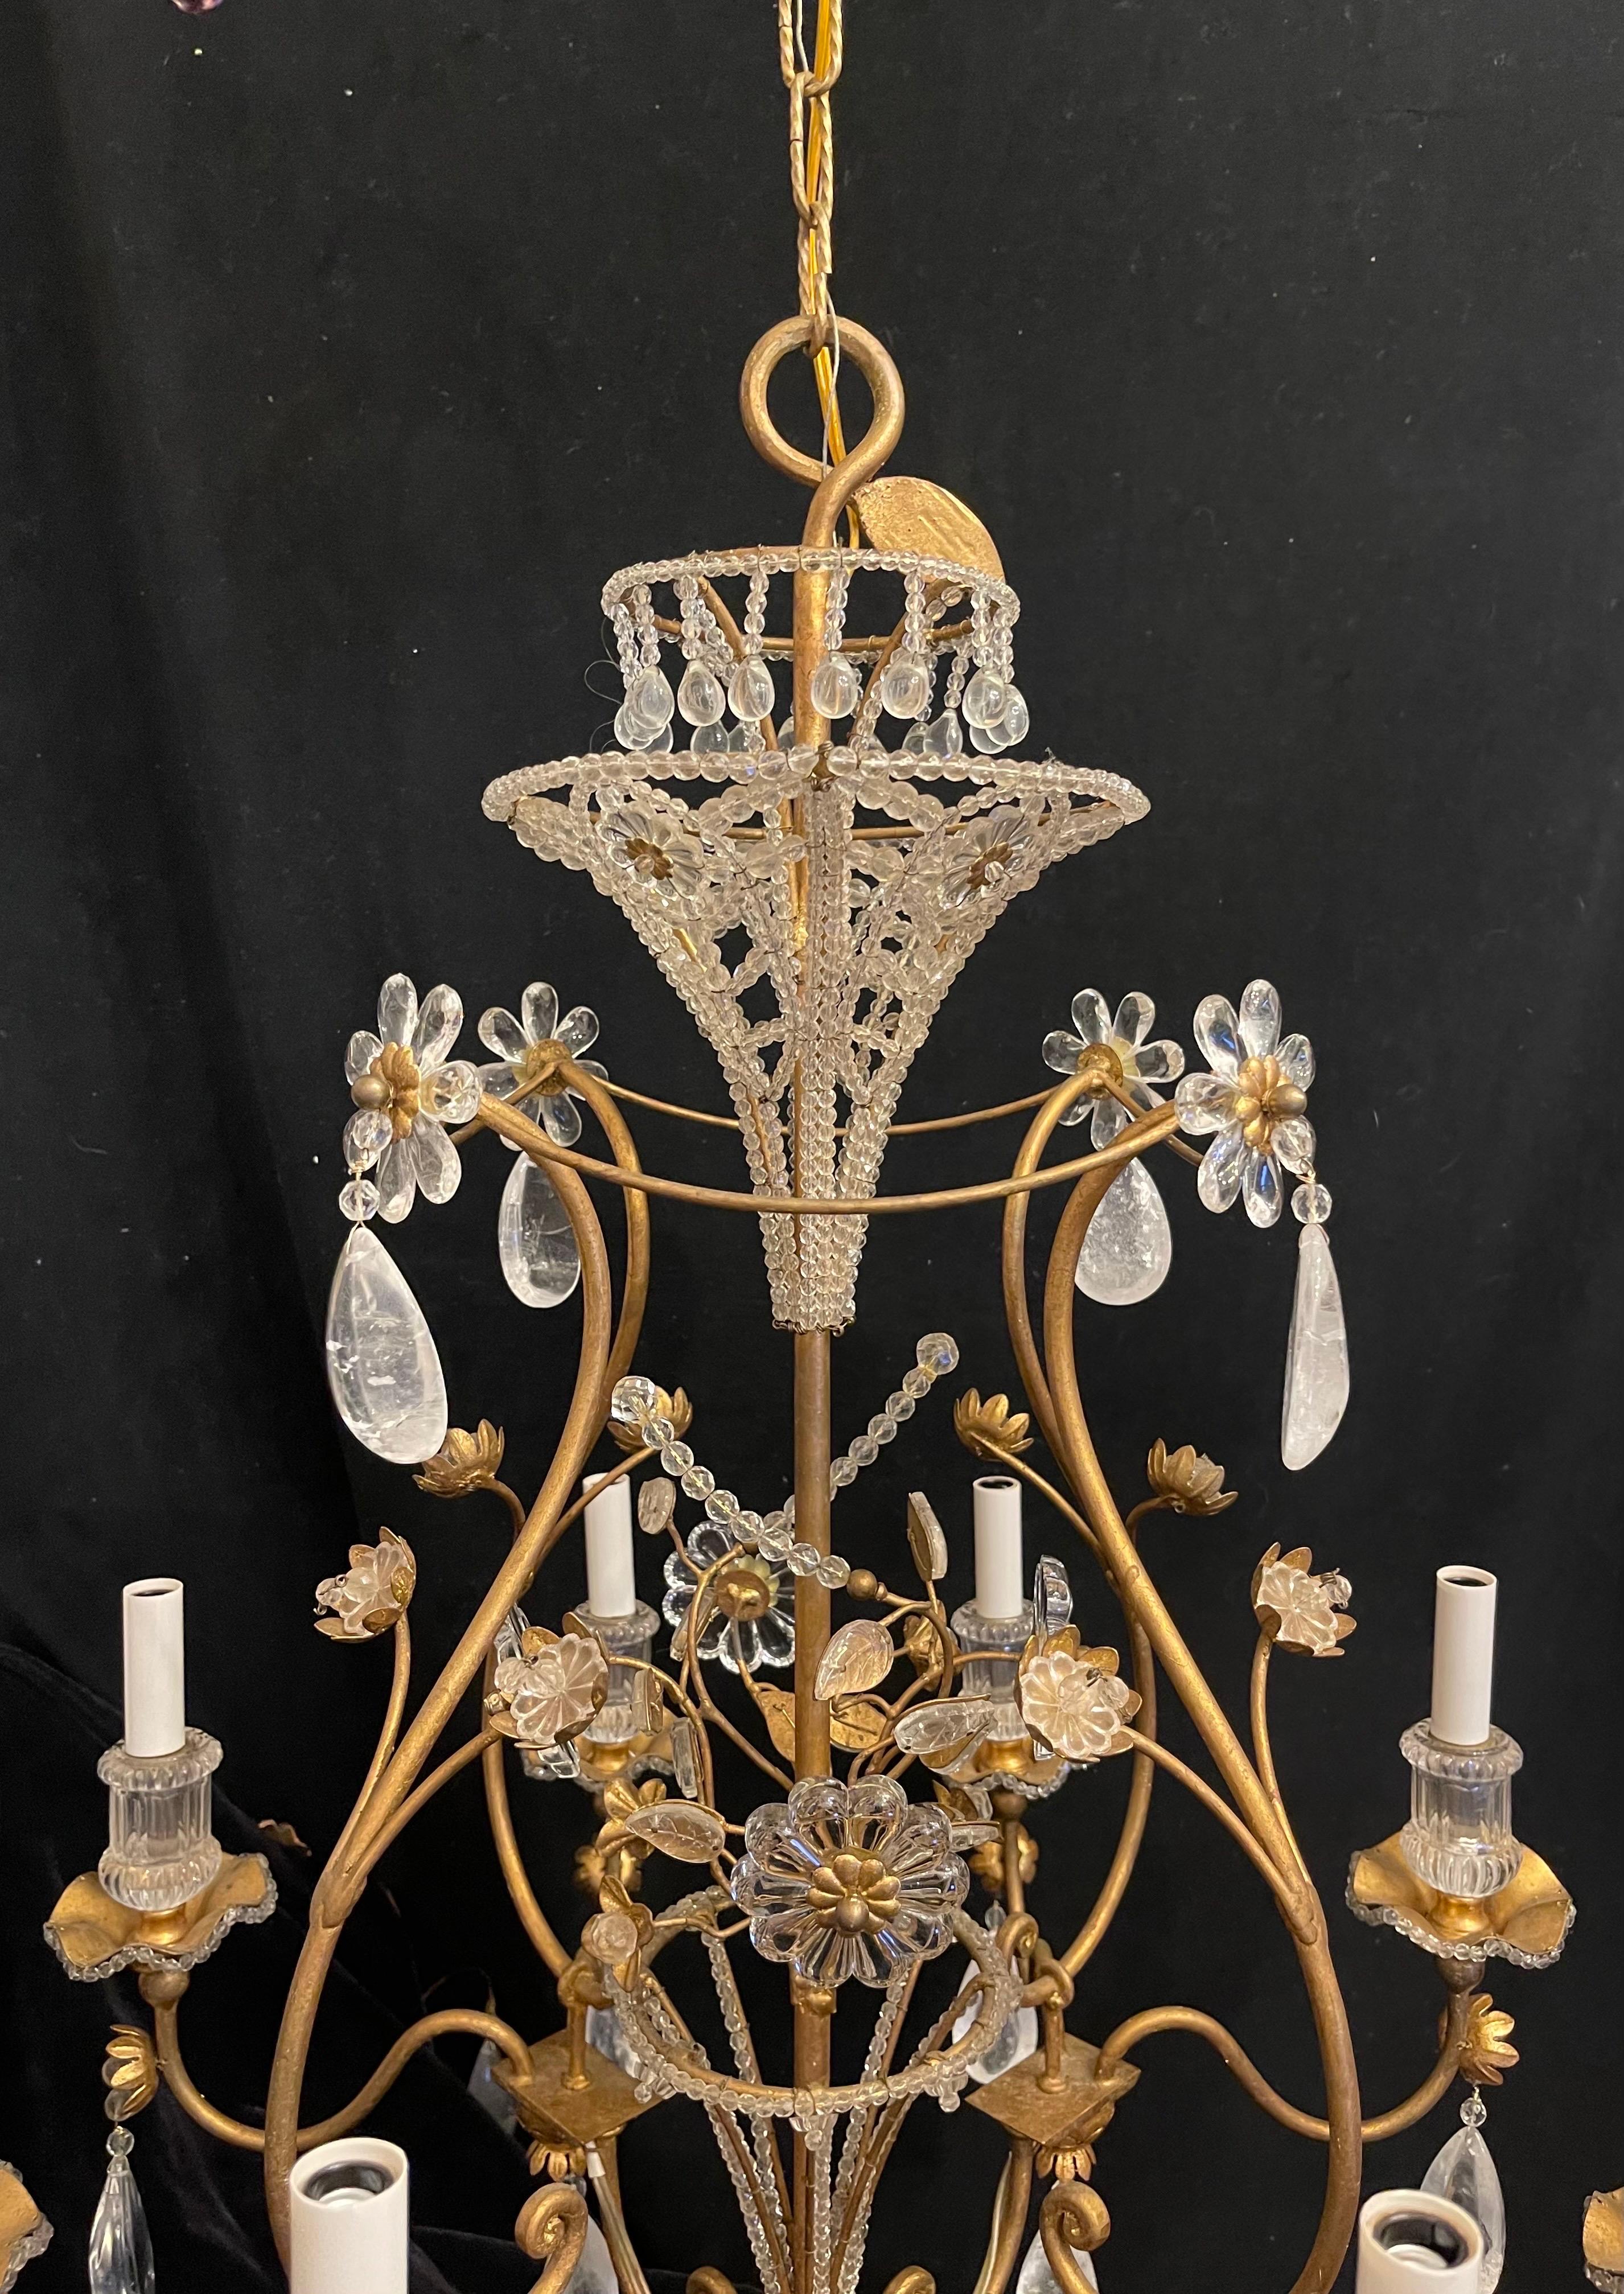 A Wonderful Mid-Century Modern Maison Baguès Style Gold Gilt With Beaded Basket And Flowers Leading To Rock Crystal Drops Large 8 Candelabra Light Chandelier.